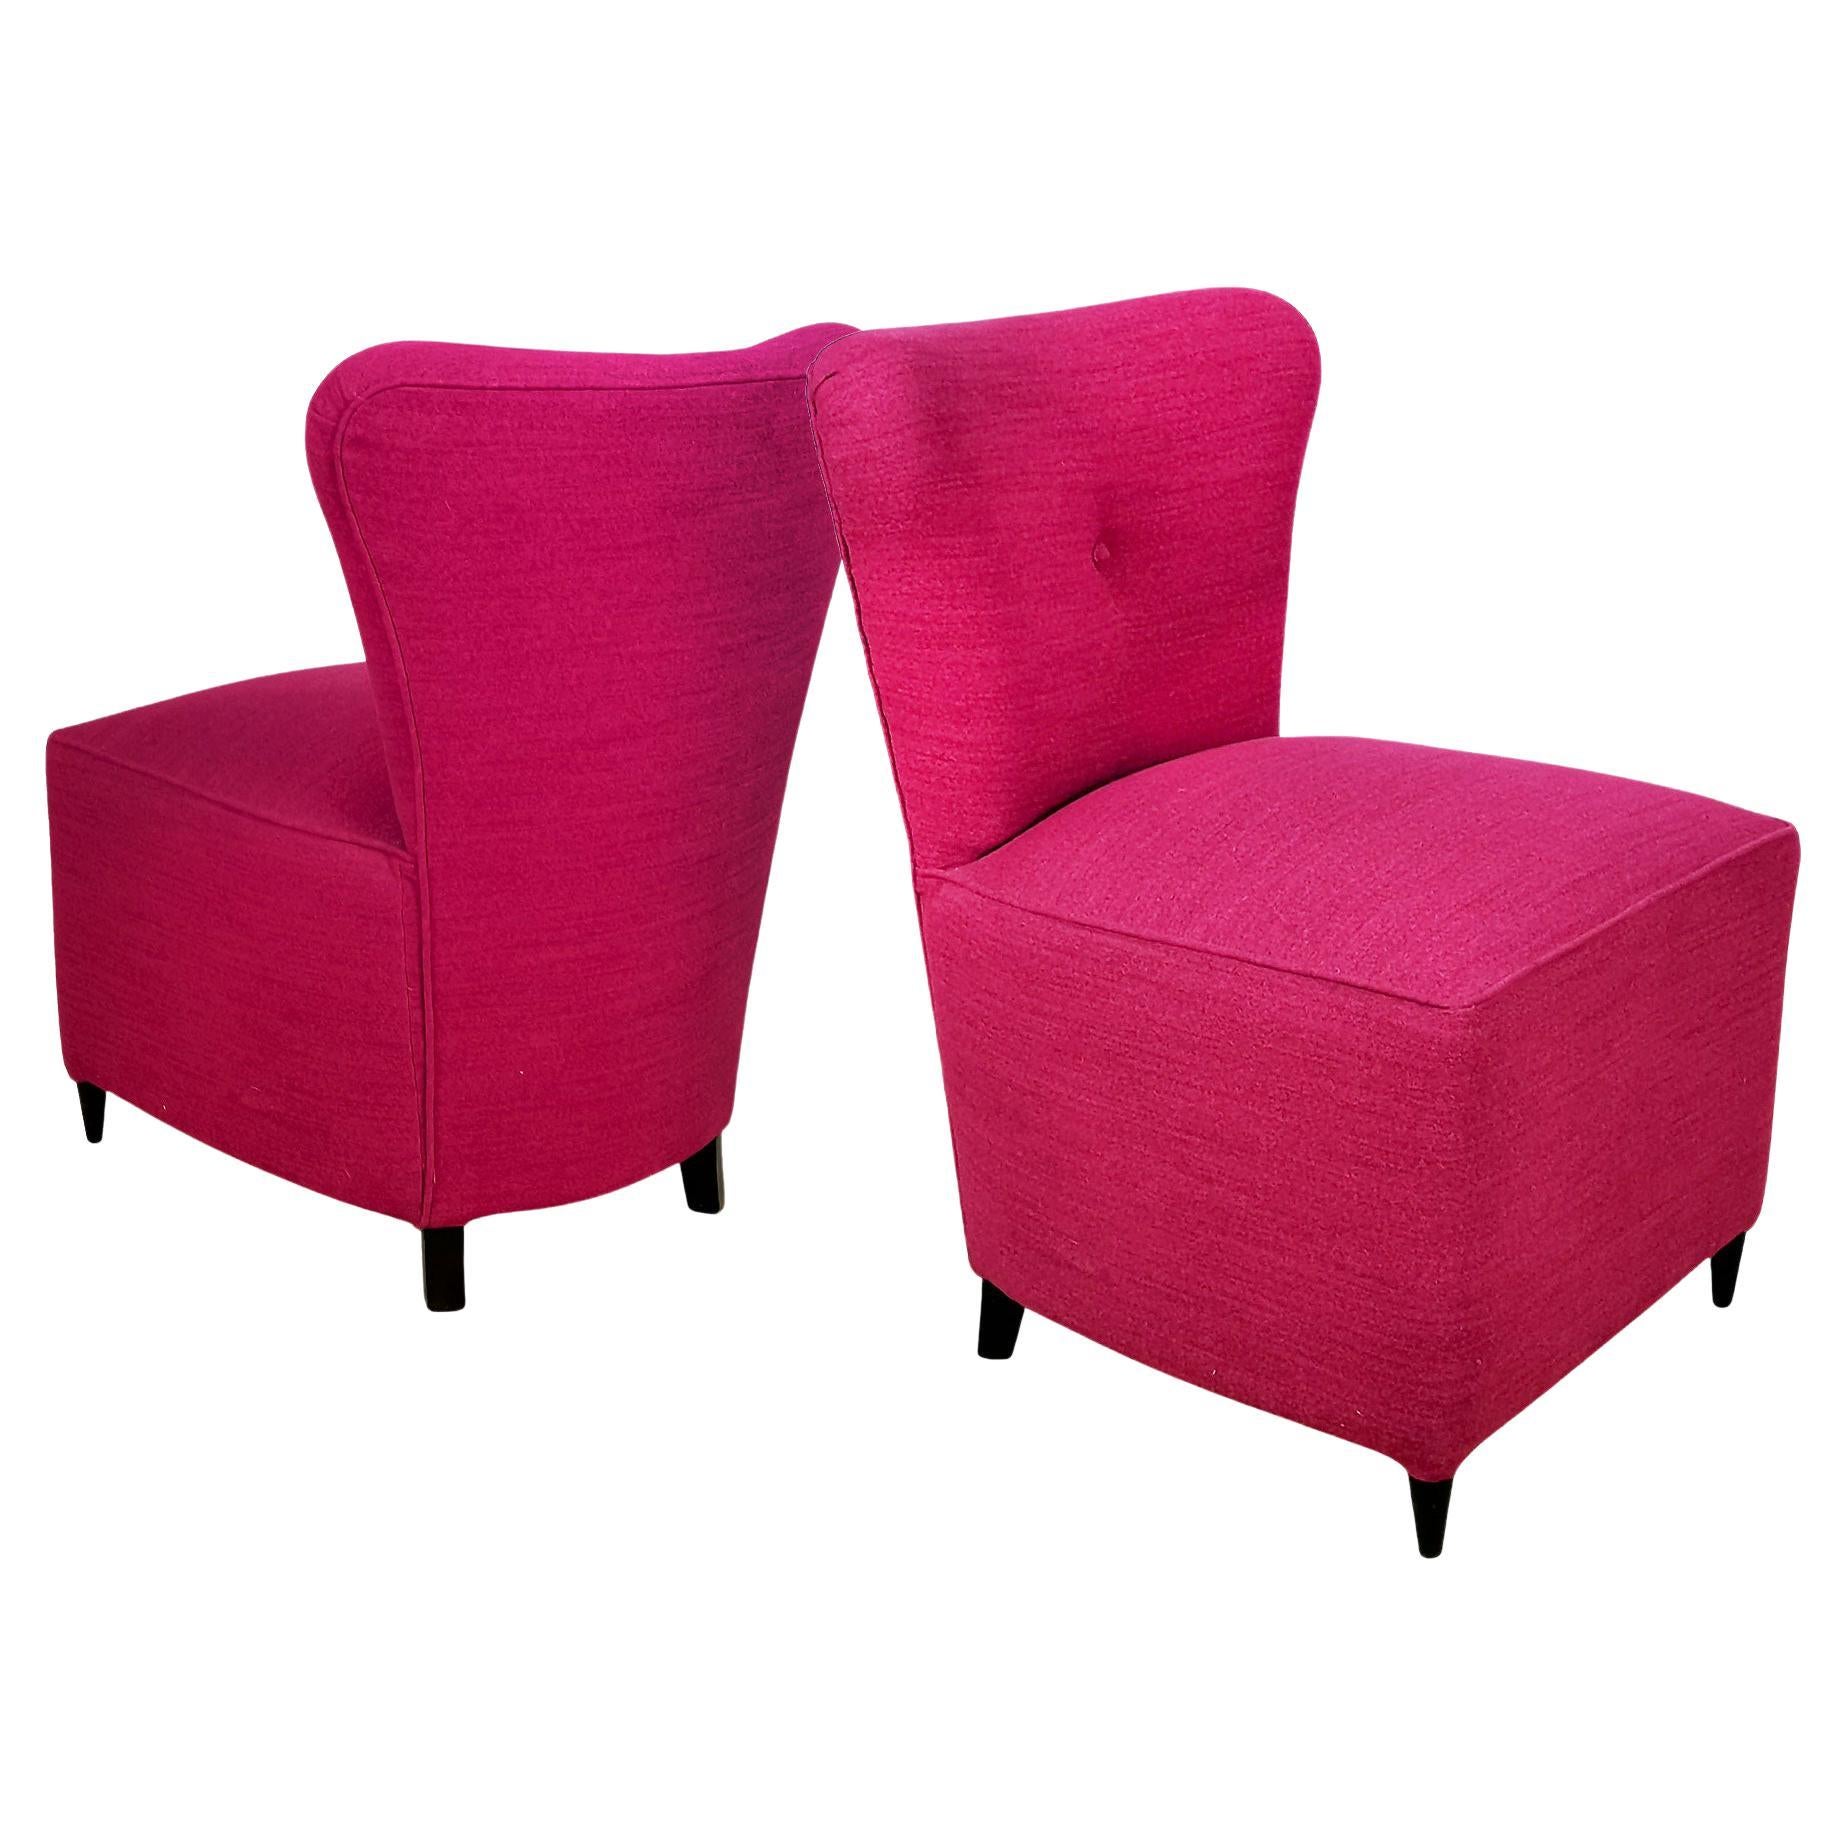 1940s Two Mini Low Chairs Pink Felt, Wood, Italy